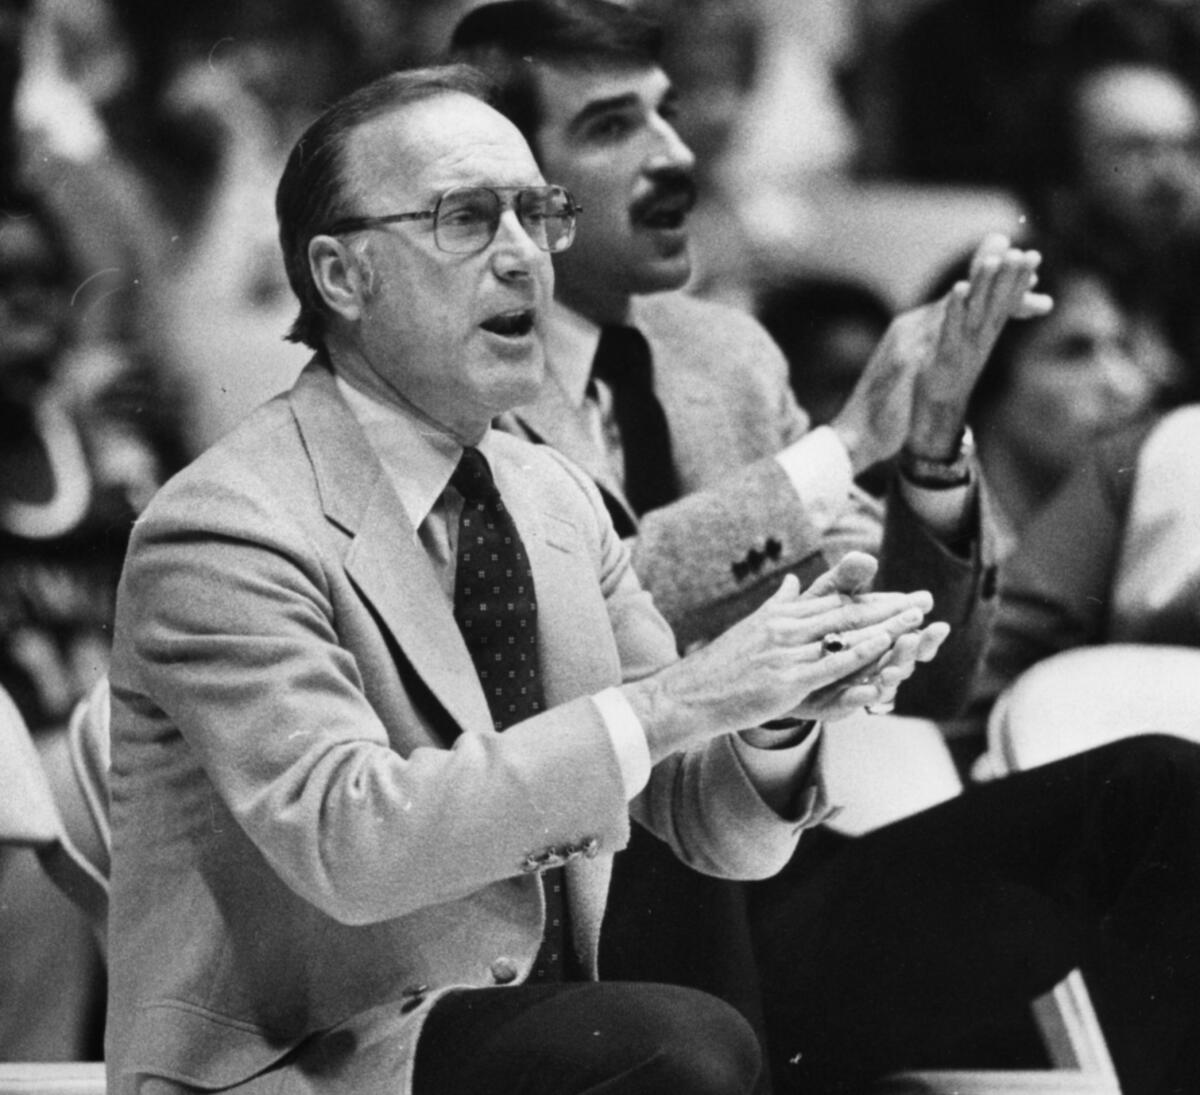 1980 lakers coach